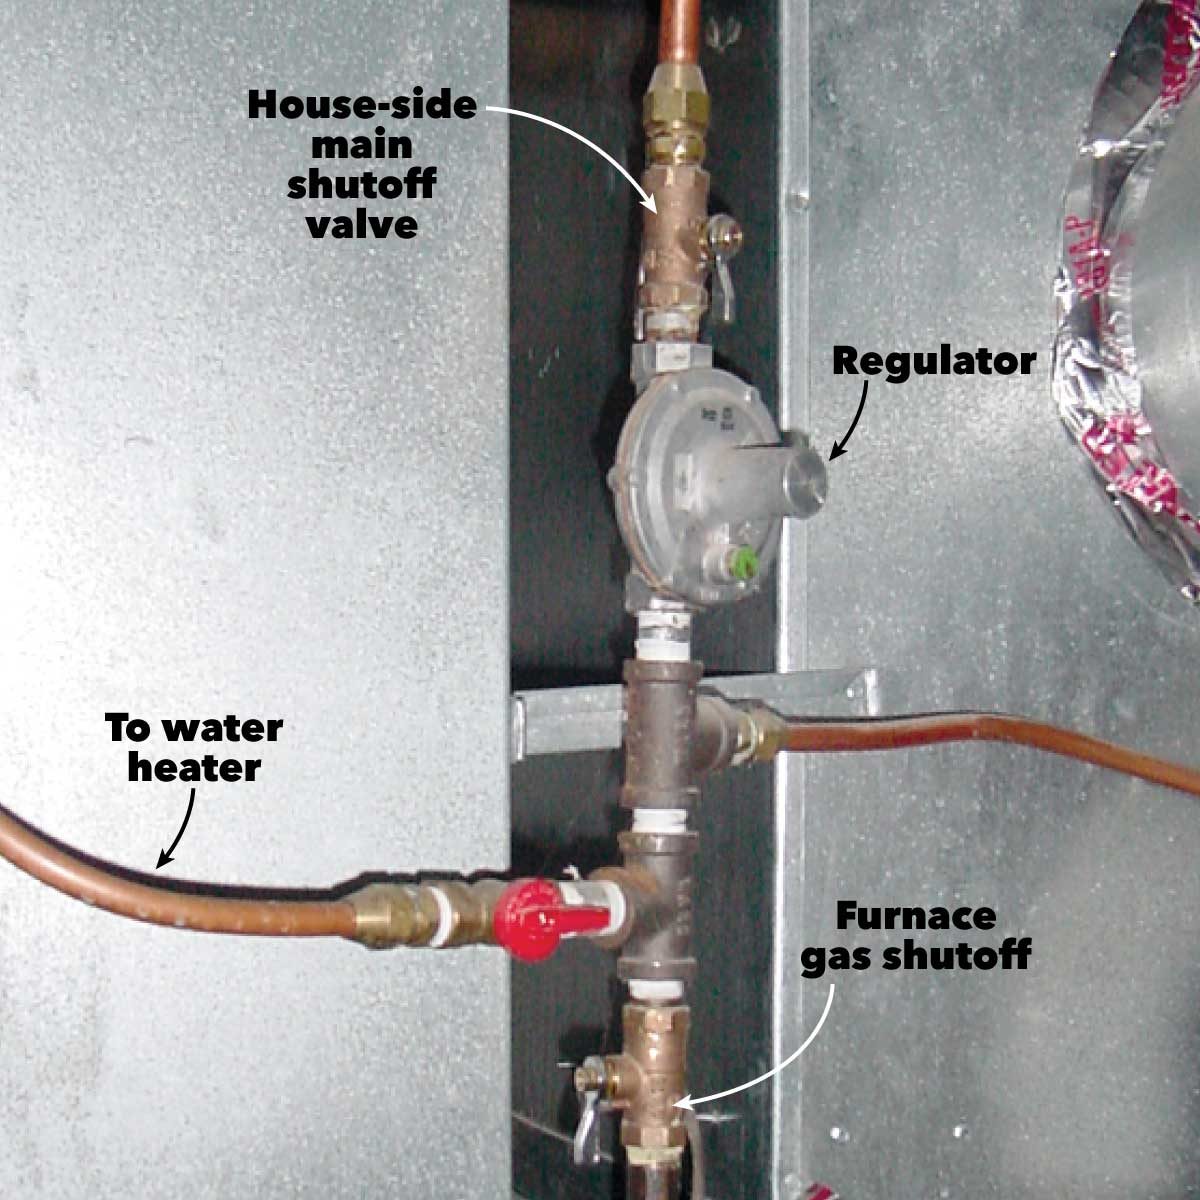 How an Automatic Water Shut-off Valve Could Have Helped Me